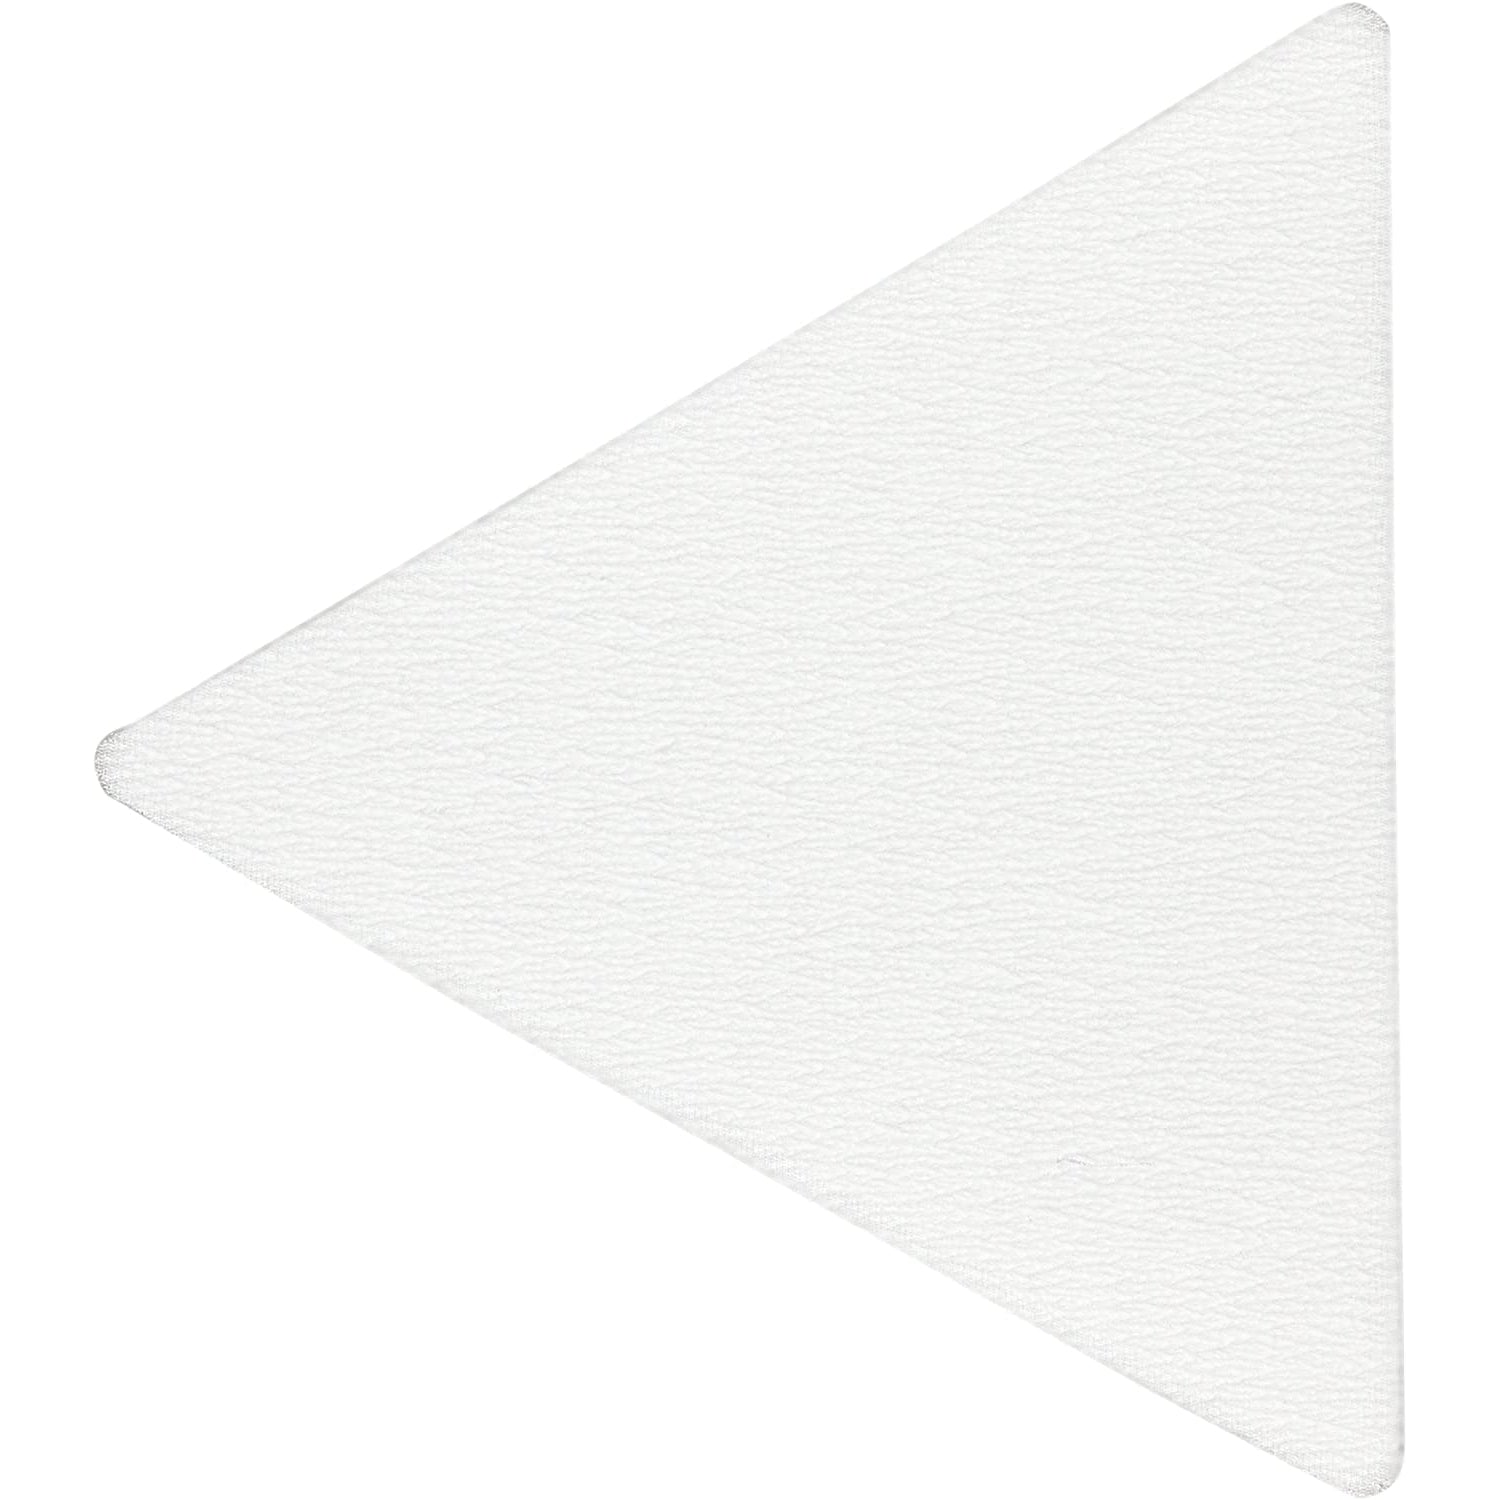 Full Circle International Inc. TG220 Level180 Sandpaper Triangles 220 Grit 5-Pack - The Paint People